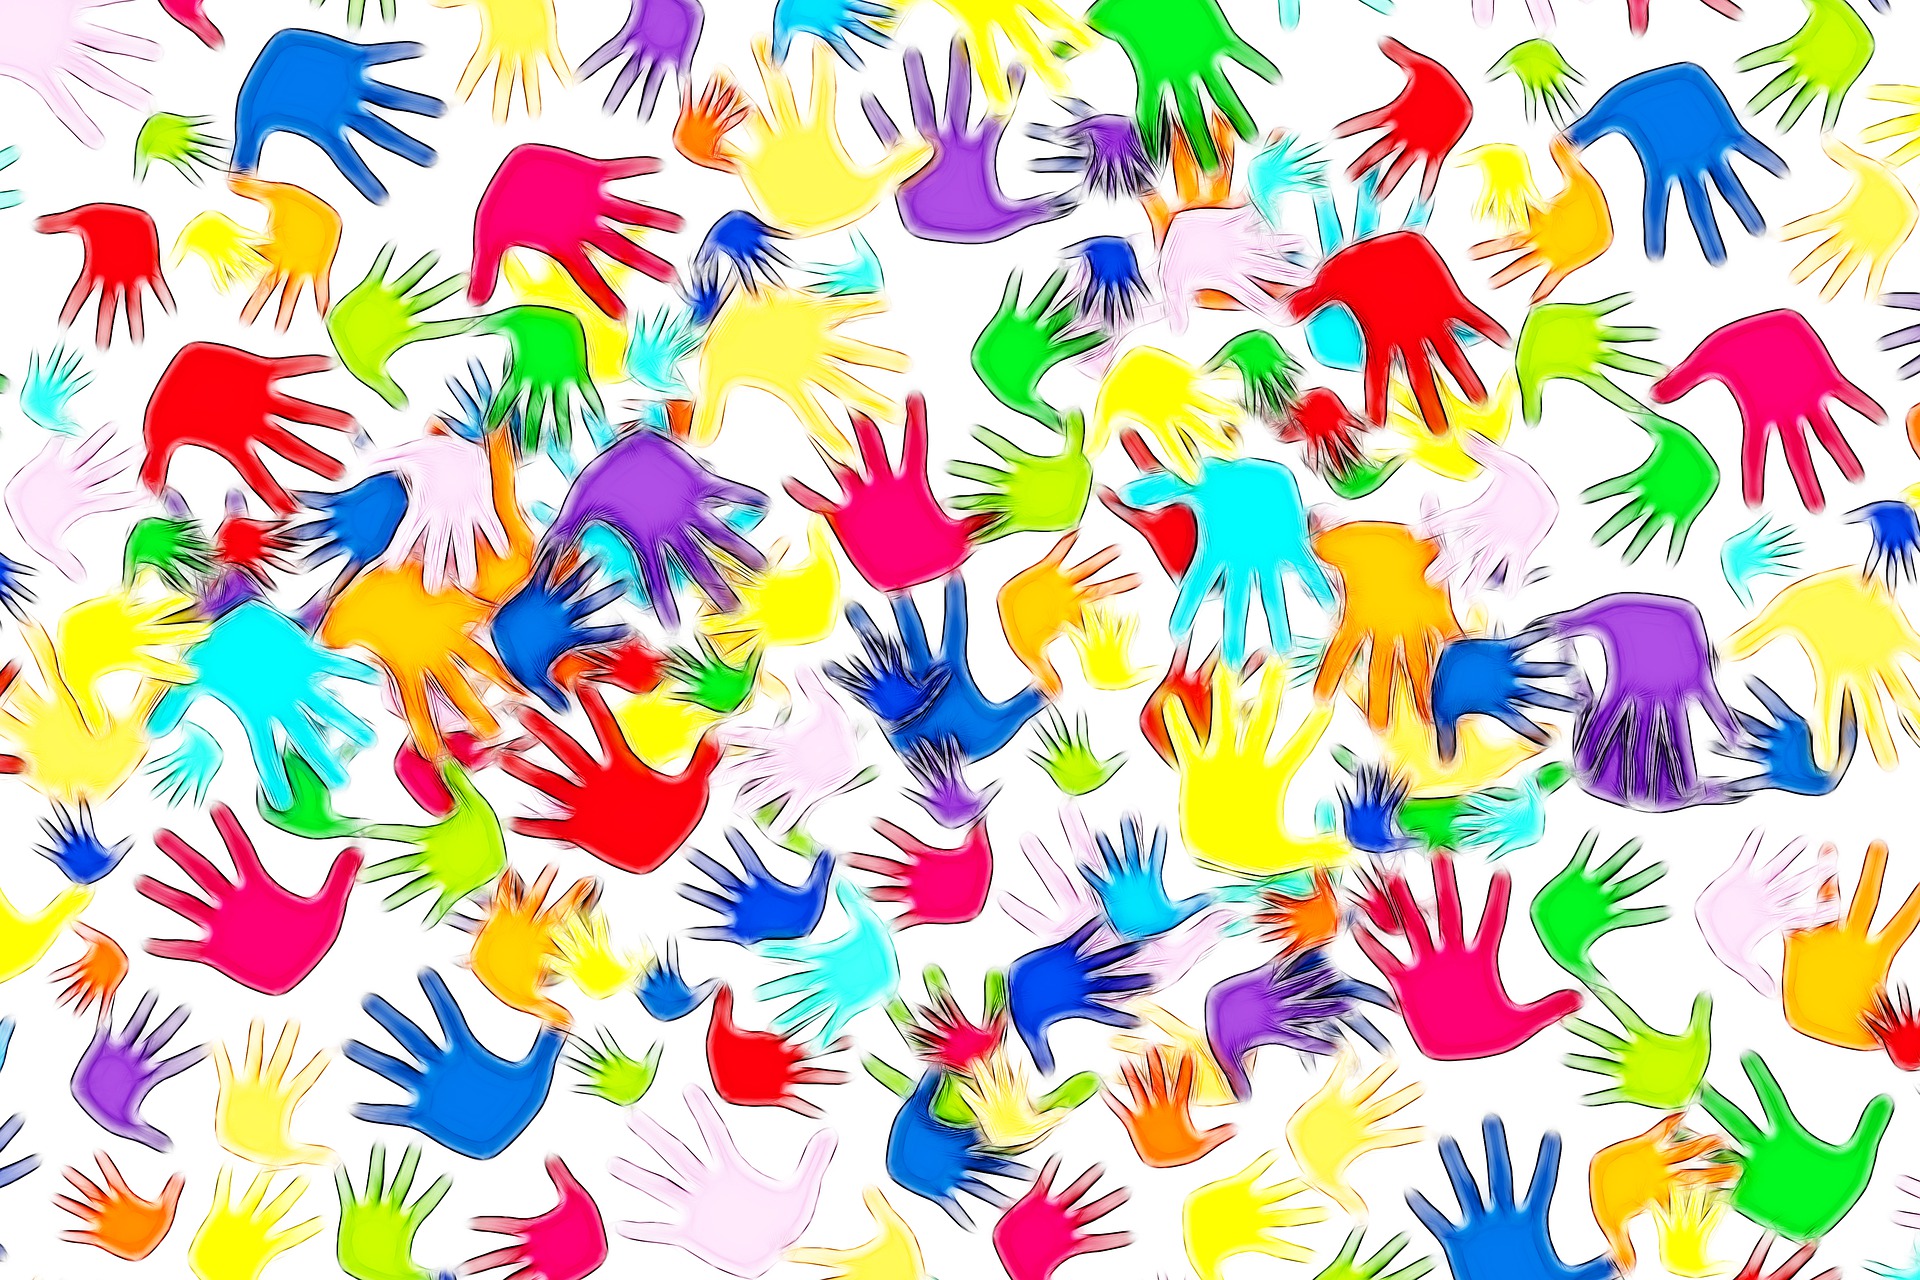 Image of hands accompanying post on Scottish Cpouncil for Voluntary Organisations